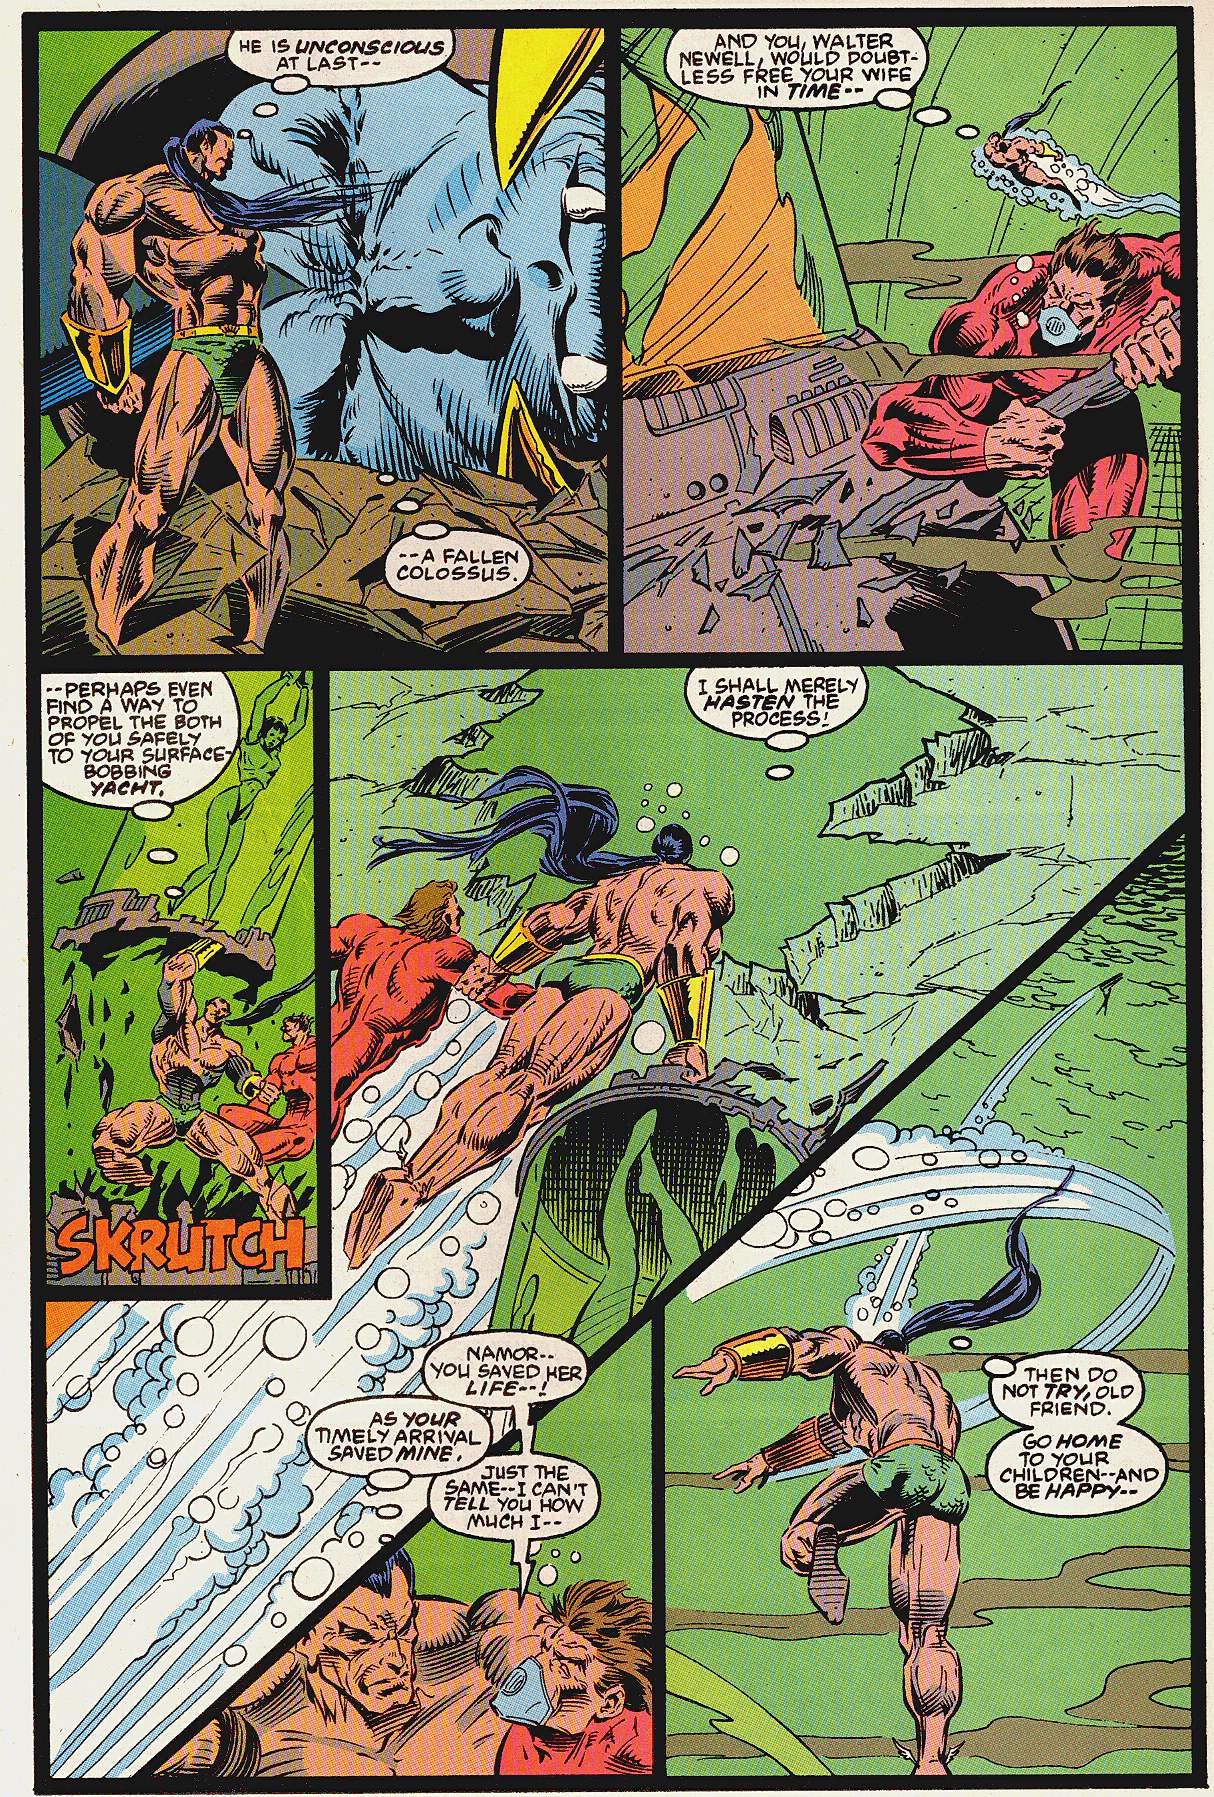 Read online Namor, The Sub-Mariner comic -  Issue #43 - 21